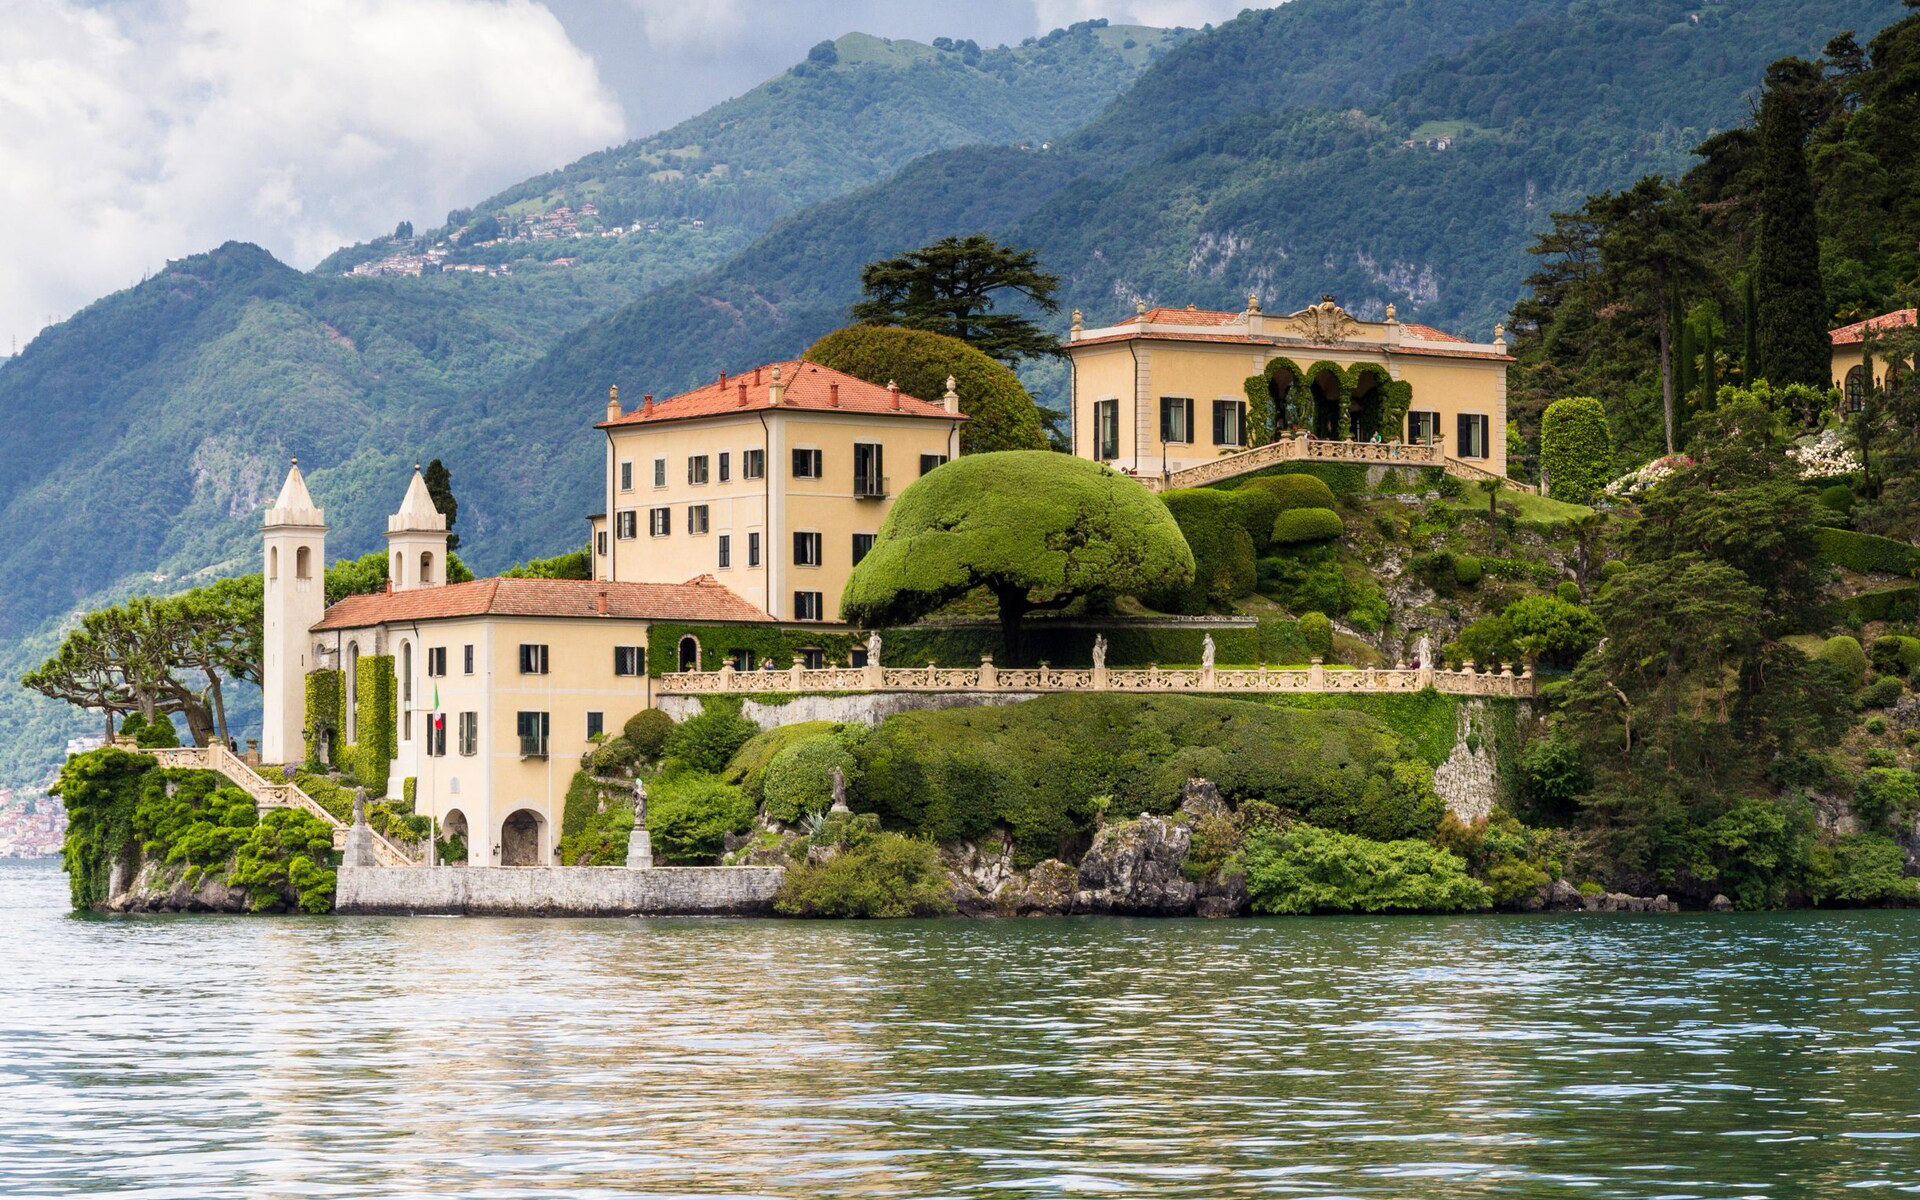 James Bond villa cuts visitor numbers as Italy battles overtourism